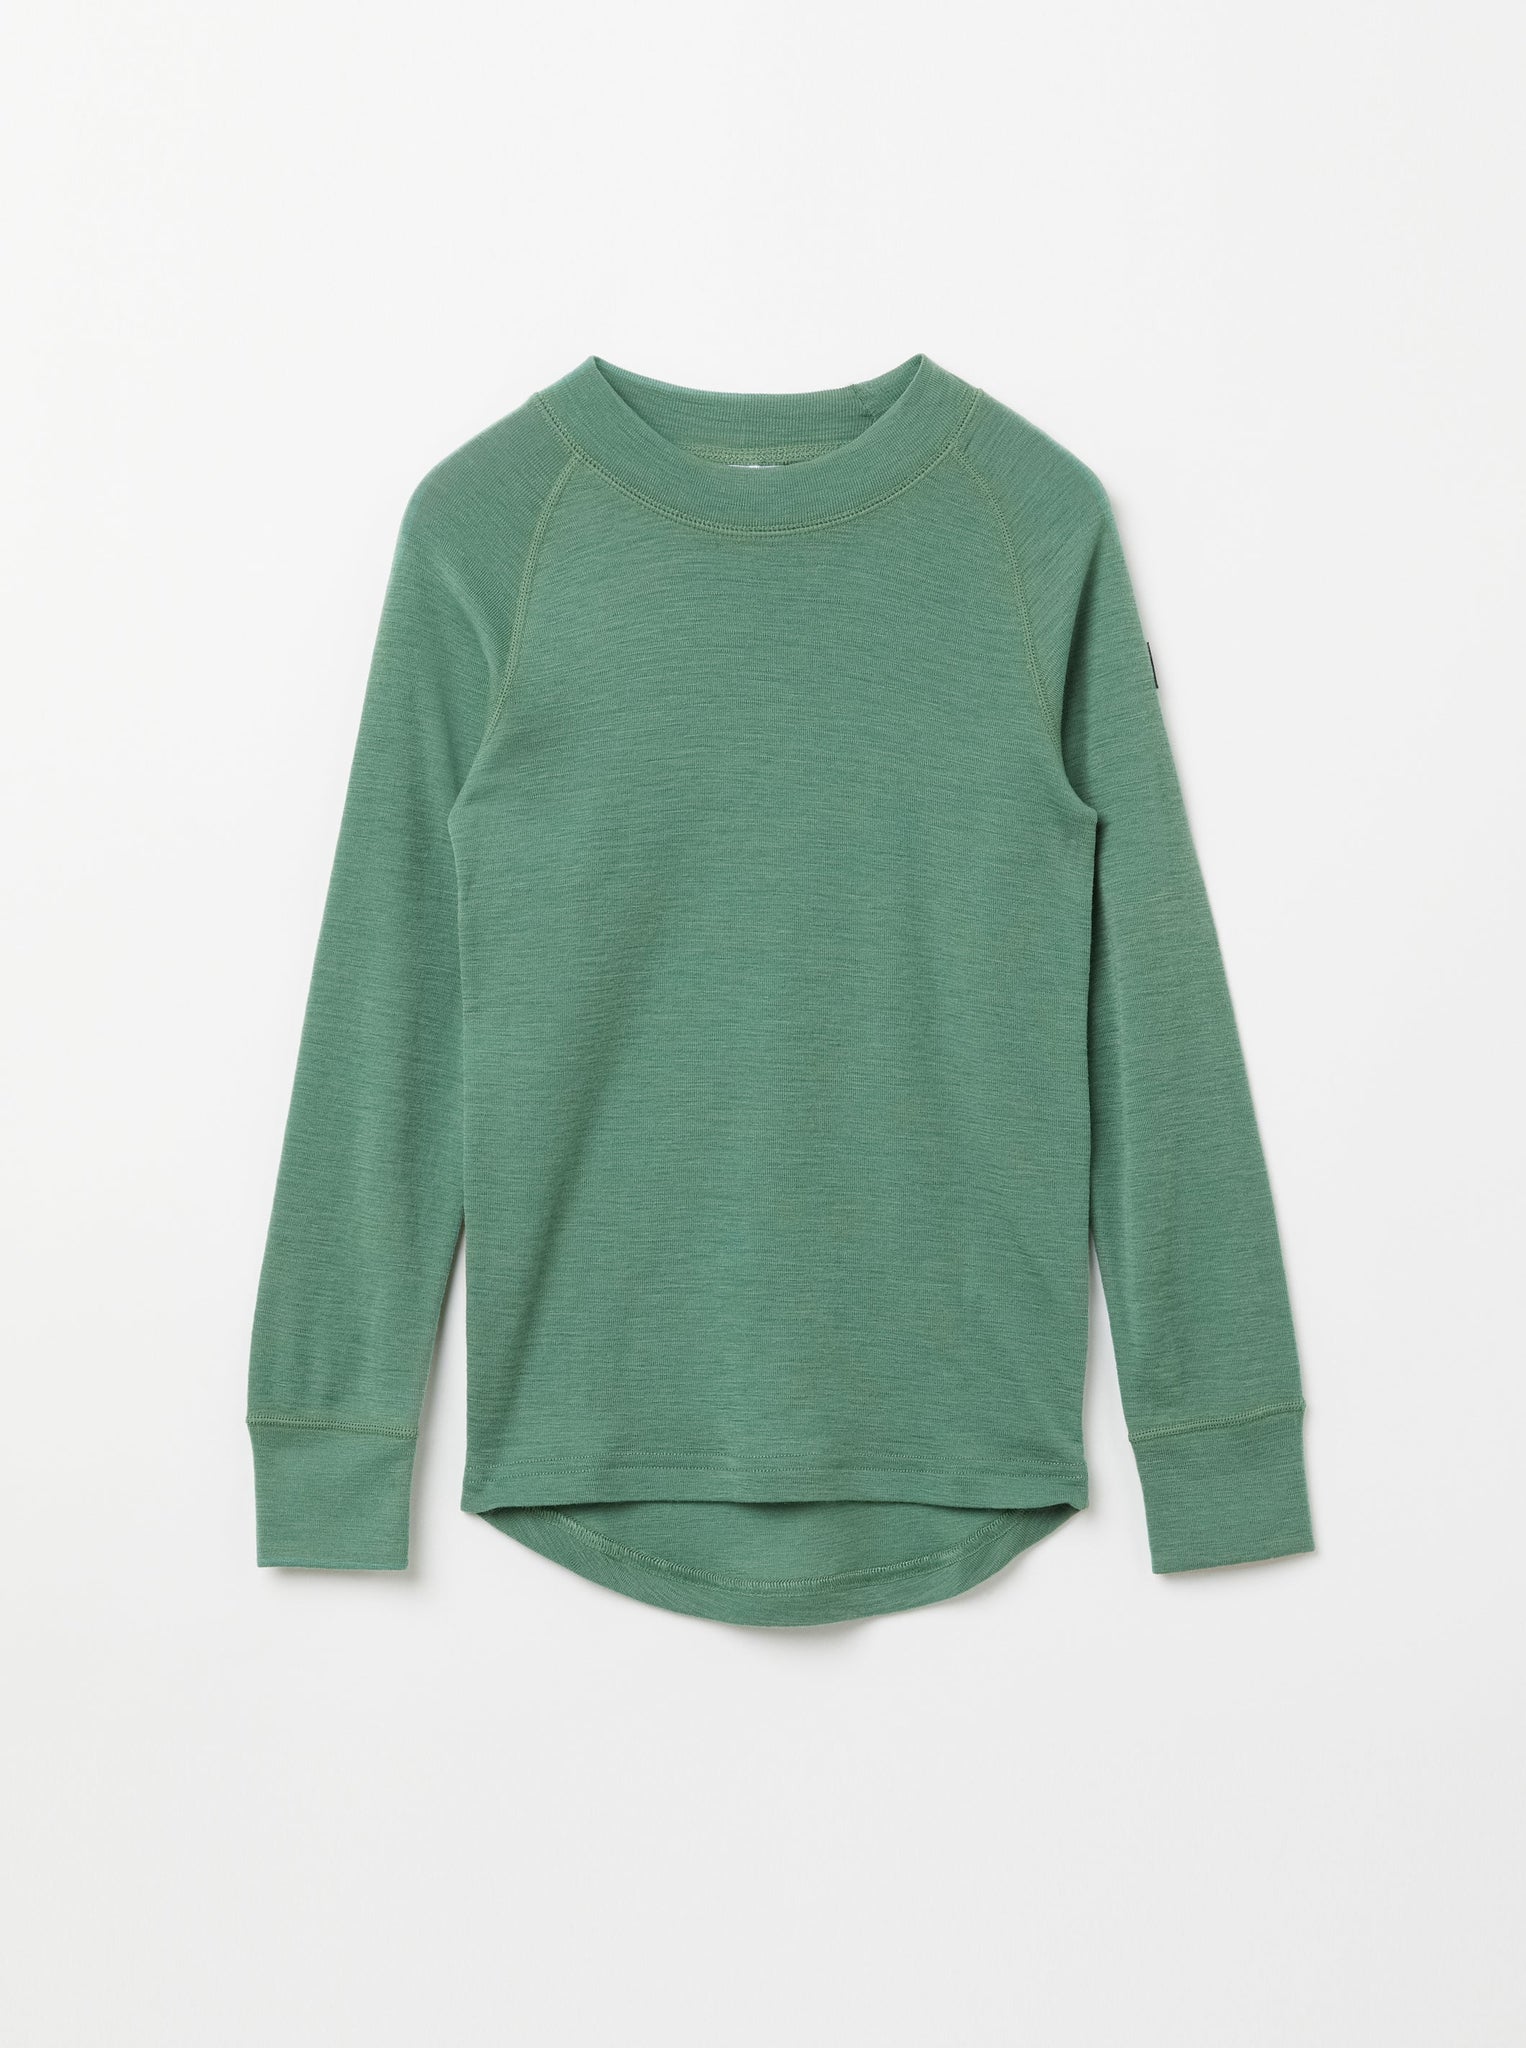 Merino Wool Green Thermal Kids Top from the Polarn O. Pyret kidswear collection. Quality kids clothing made to last.